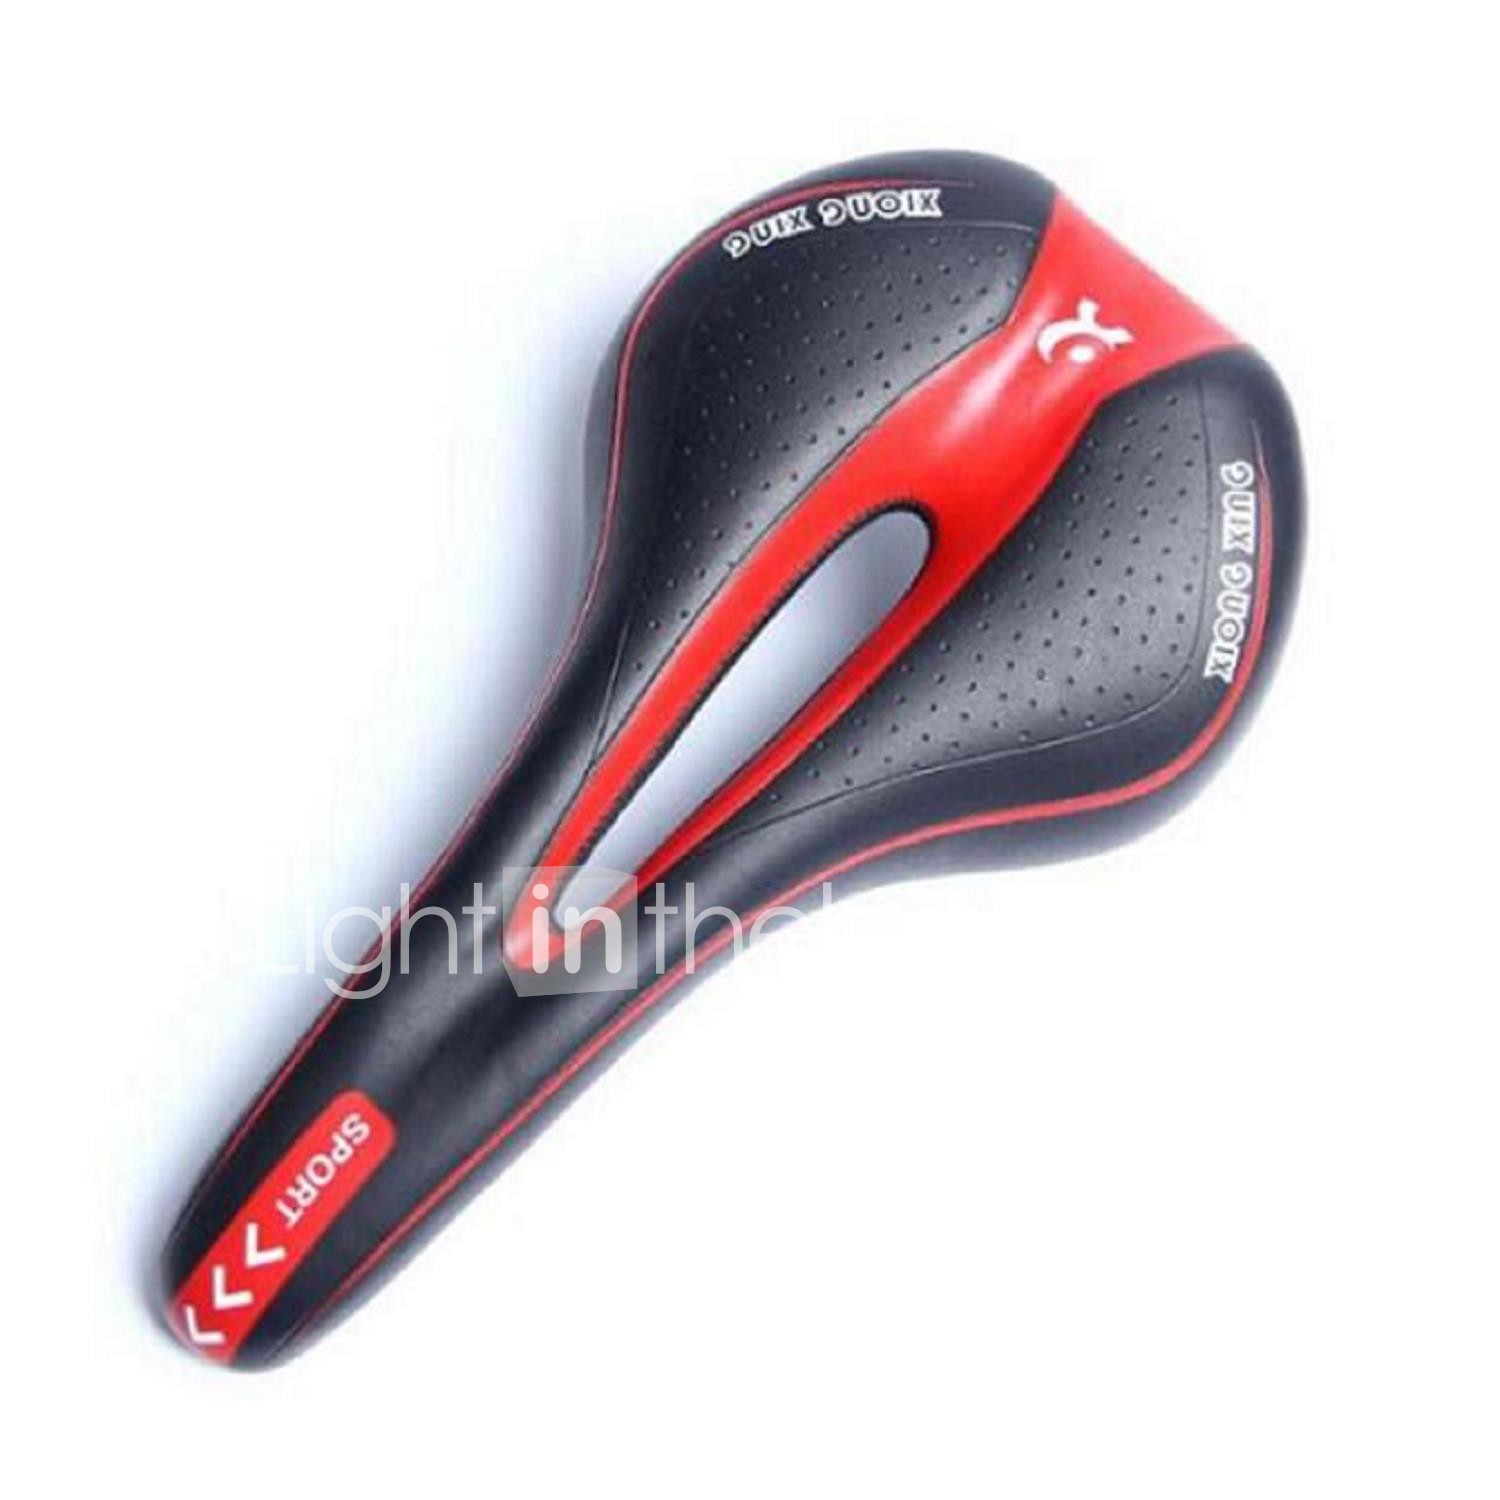 Soft Wide Road Bike Bicycle PU Leather Wear Proof Saddle Pad Seat Comfortable